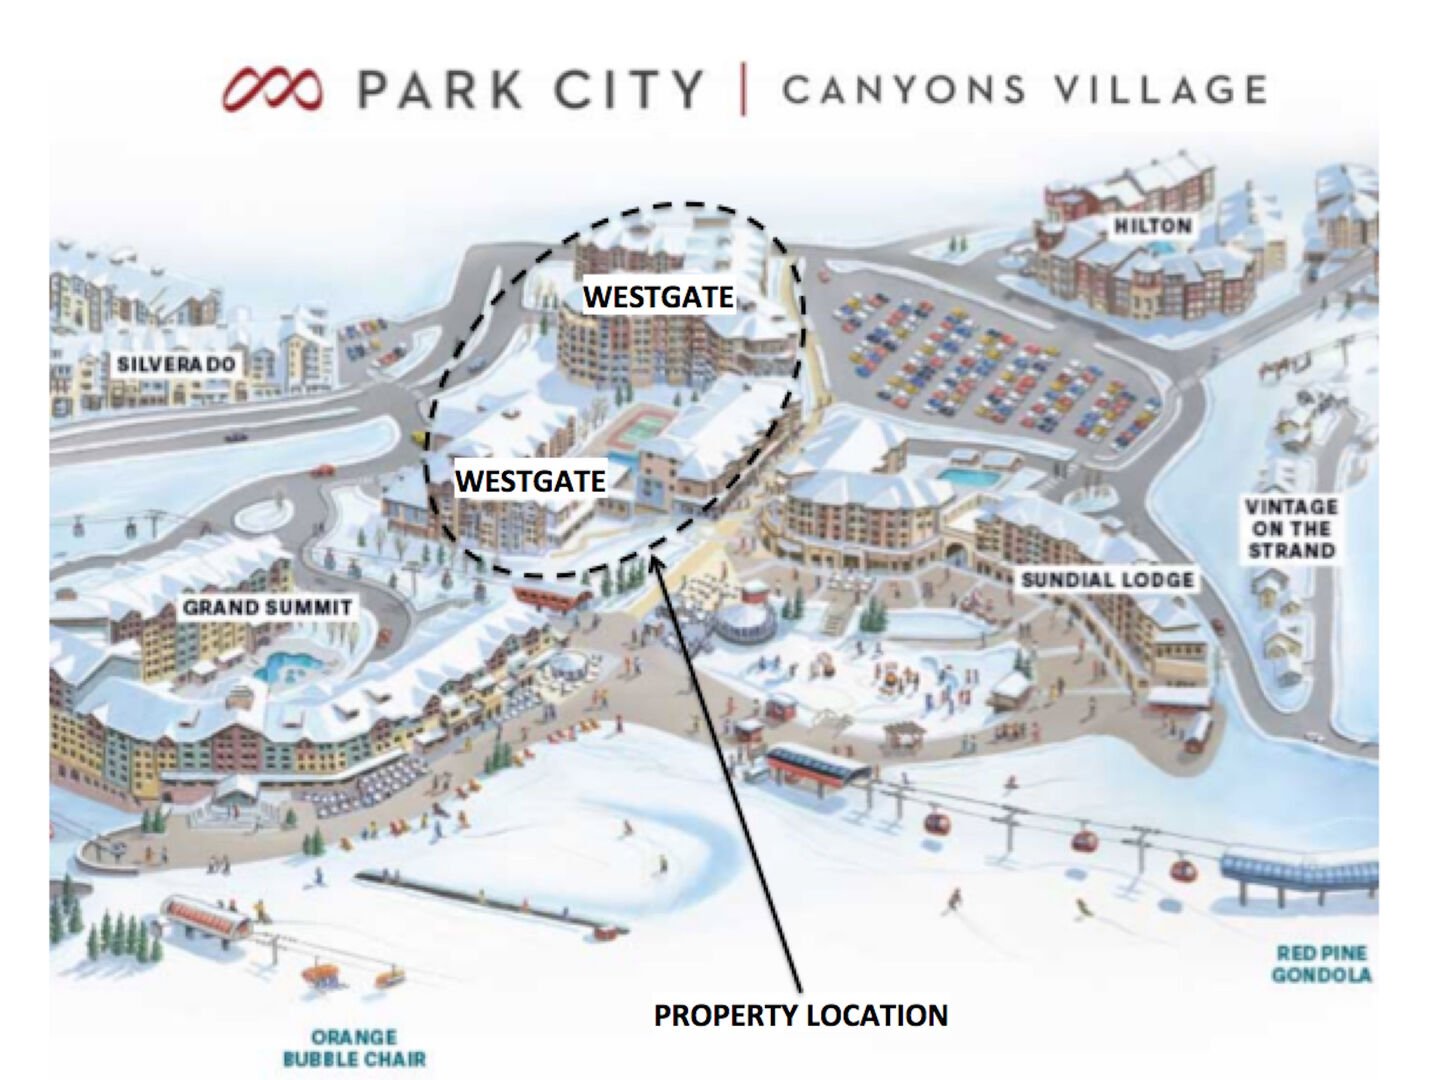 Property is located in the very heart of Park City's Canyons Village